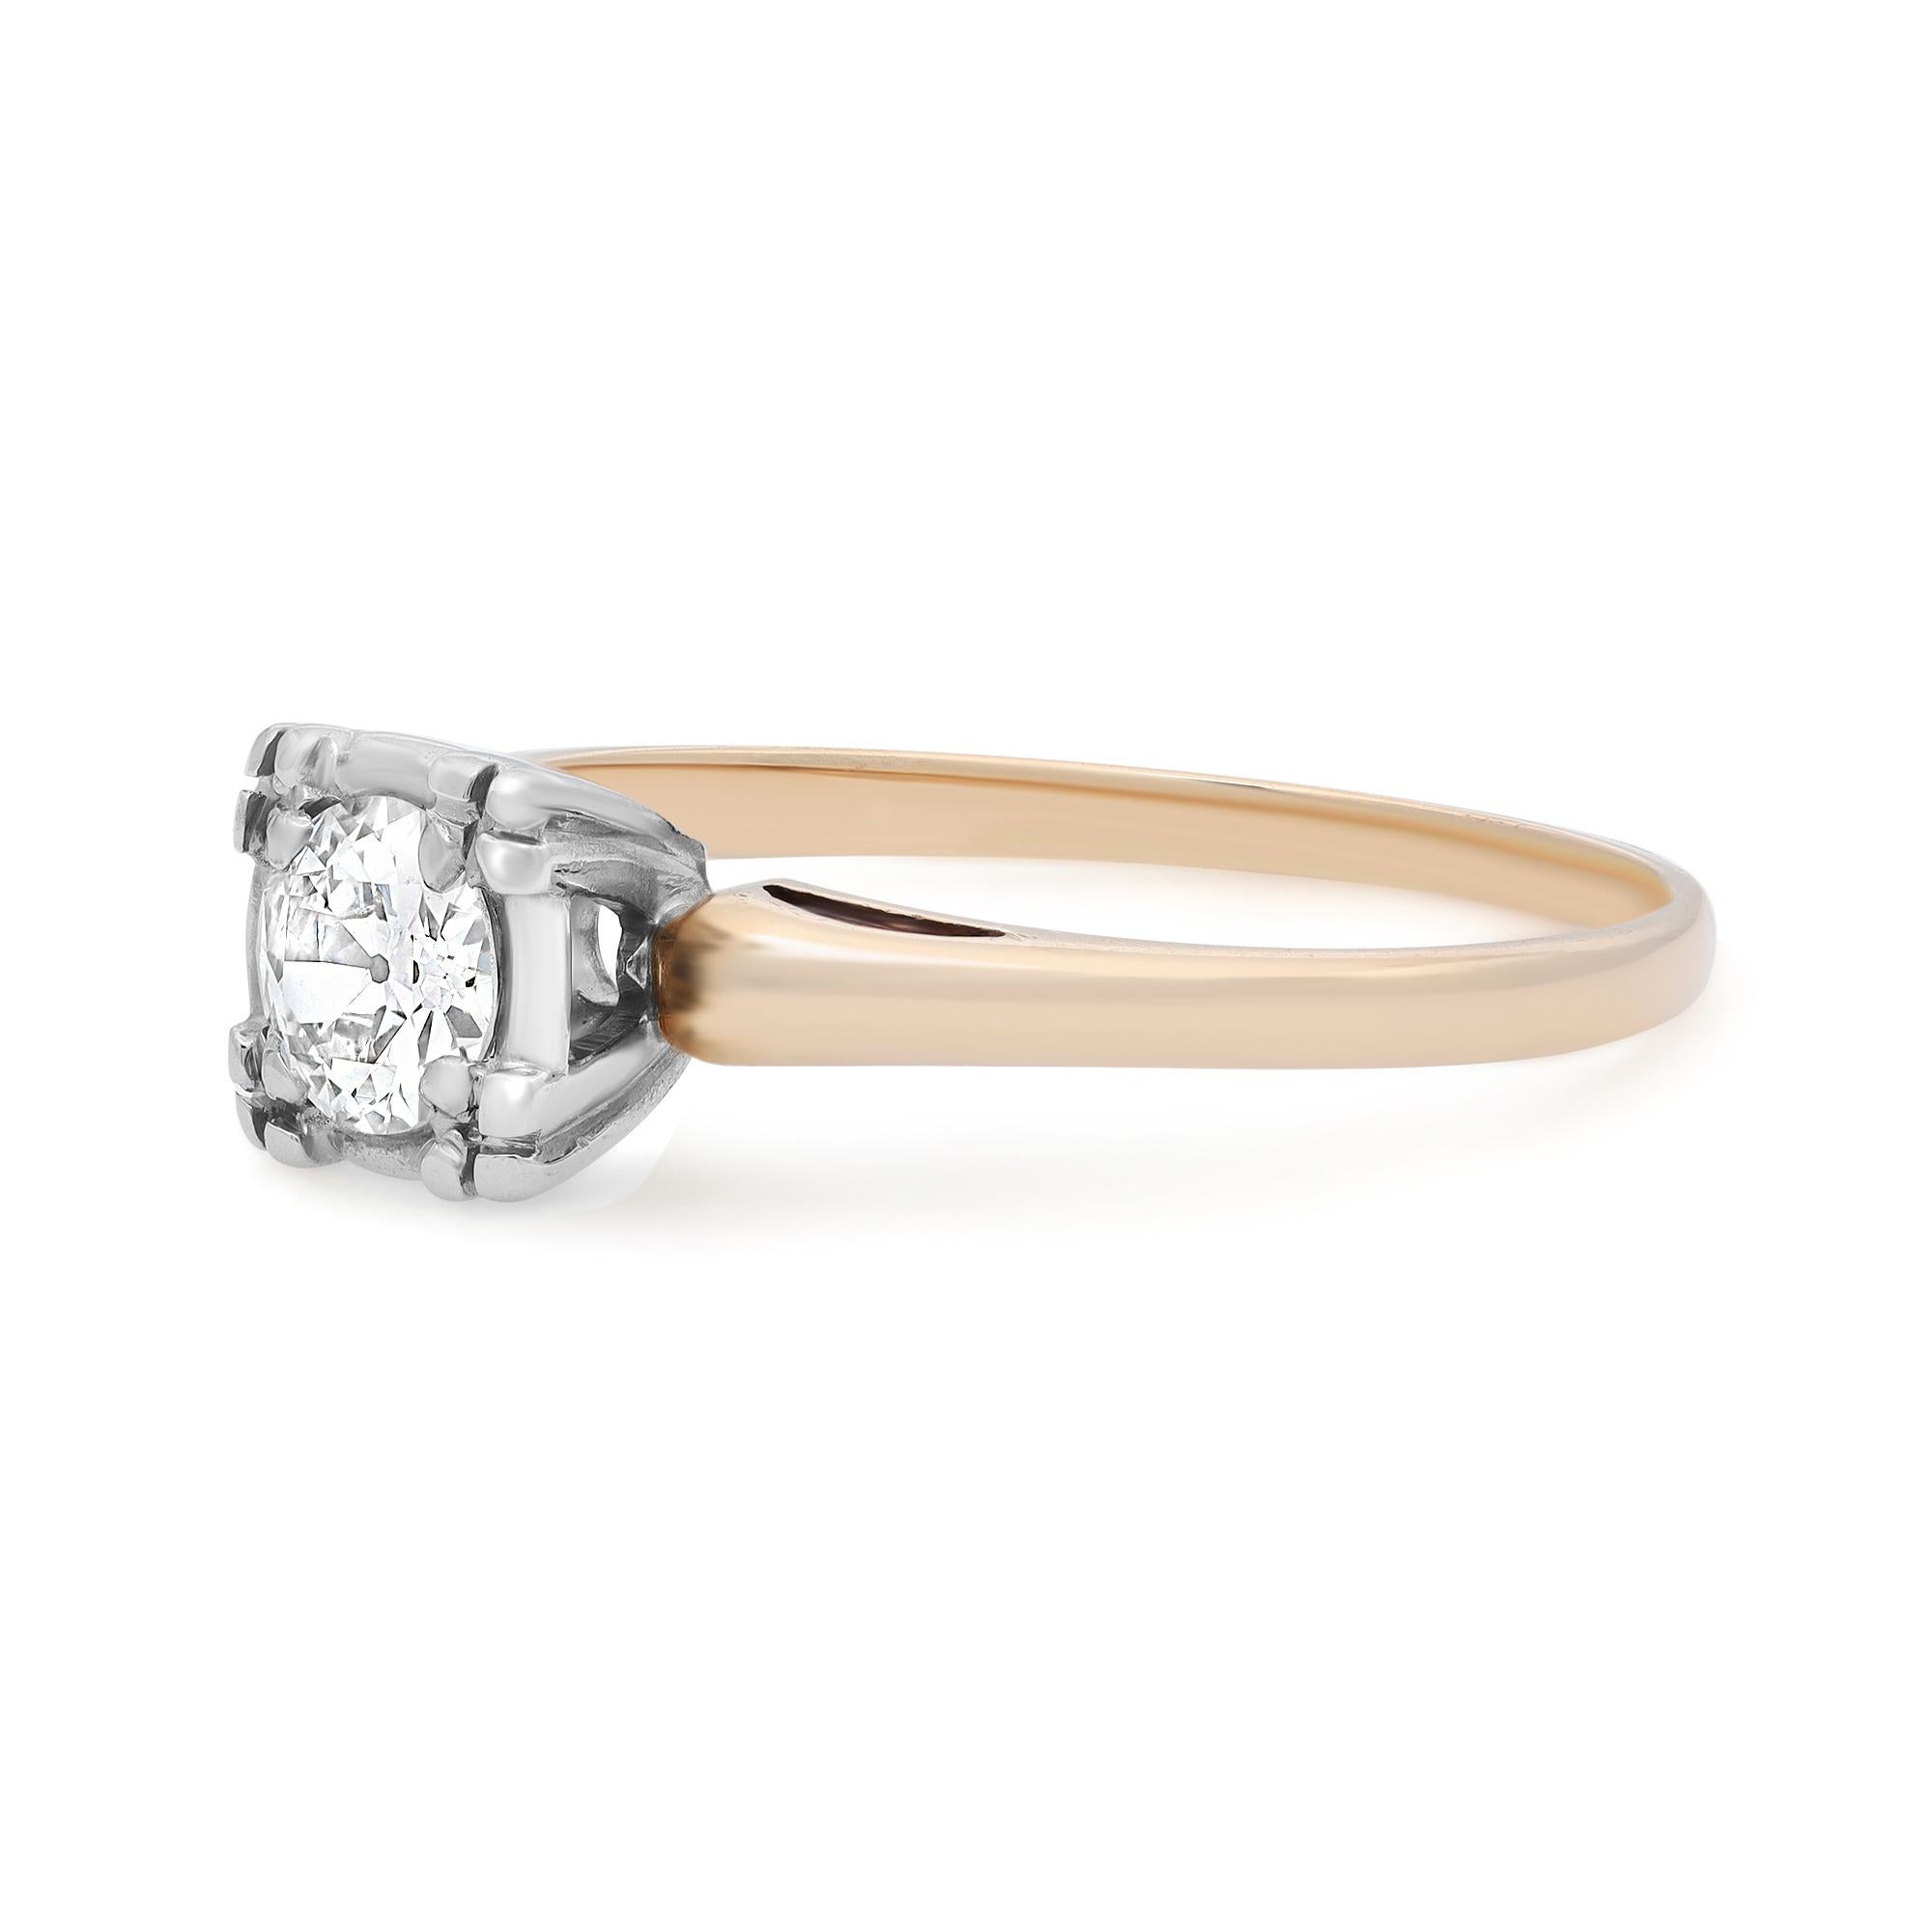 This antique solitaire engagement ring is crafted in 14K yellow gold and features a bezel set round european cut diamond weighing 0.40 carat. Diamond quality: color G-H and clarity SI1. This vintage timeless design is a perfect addition to your